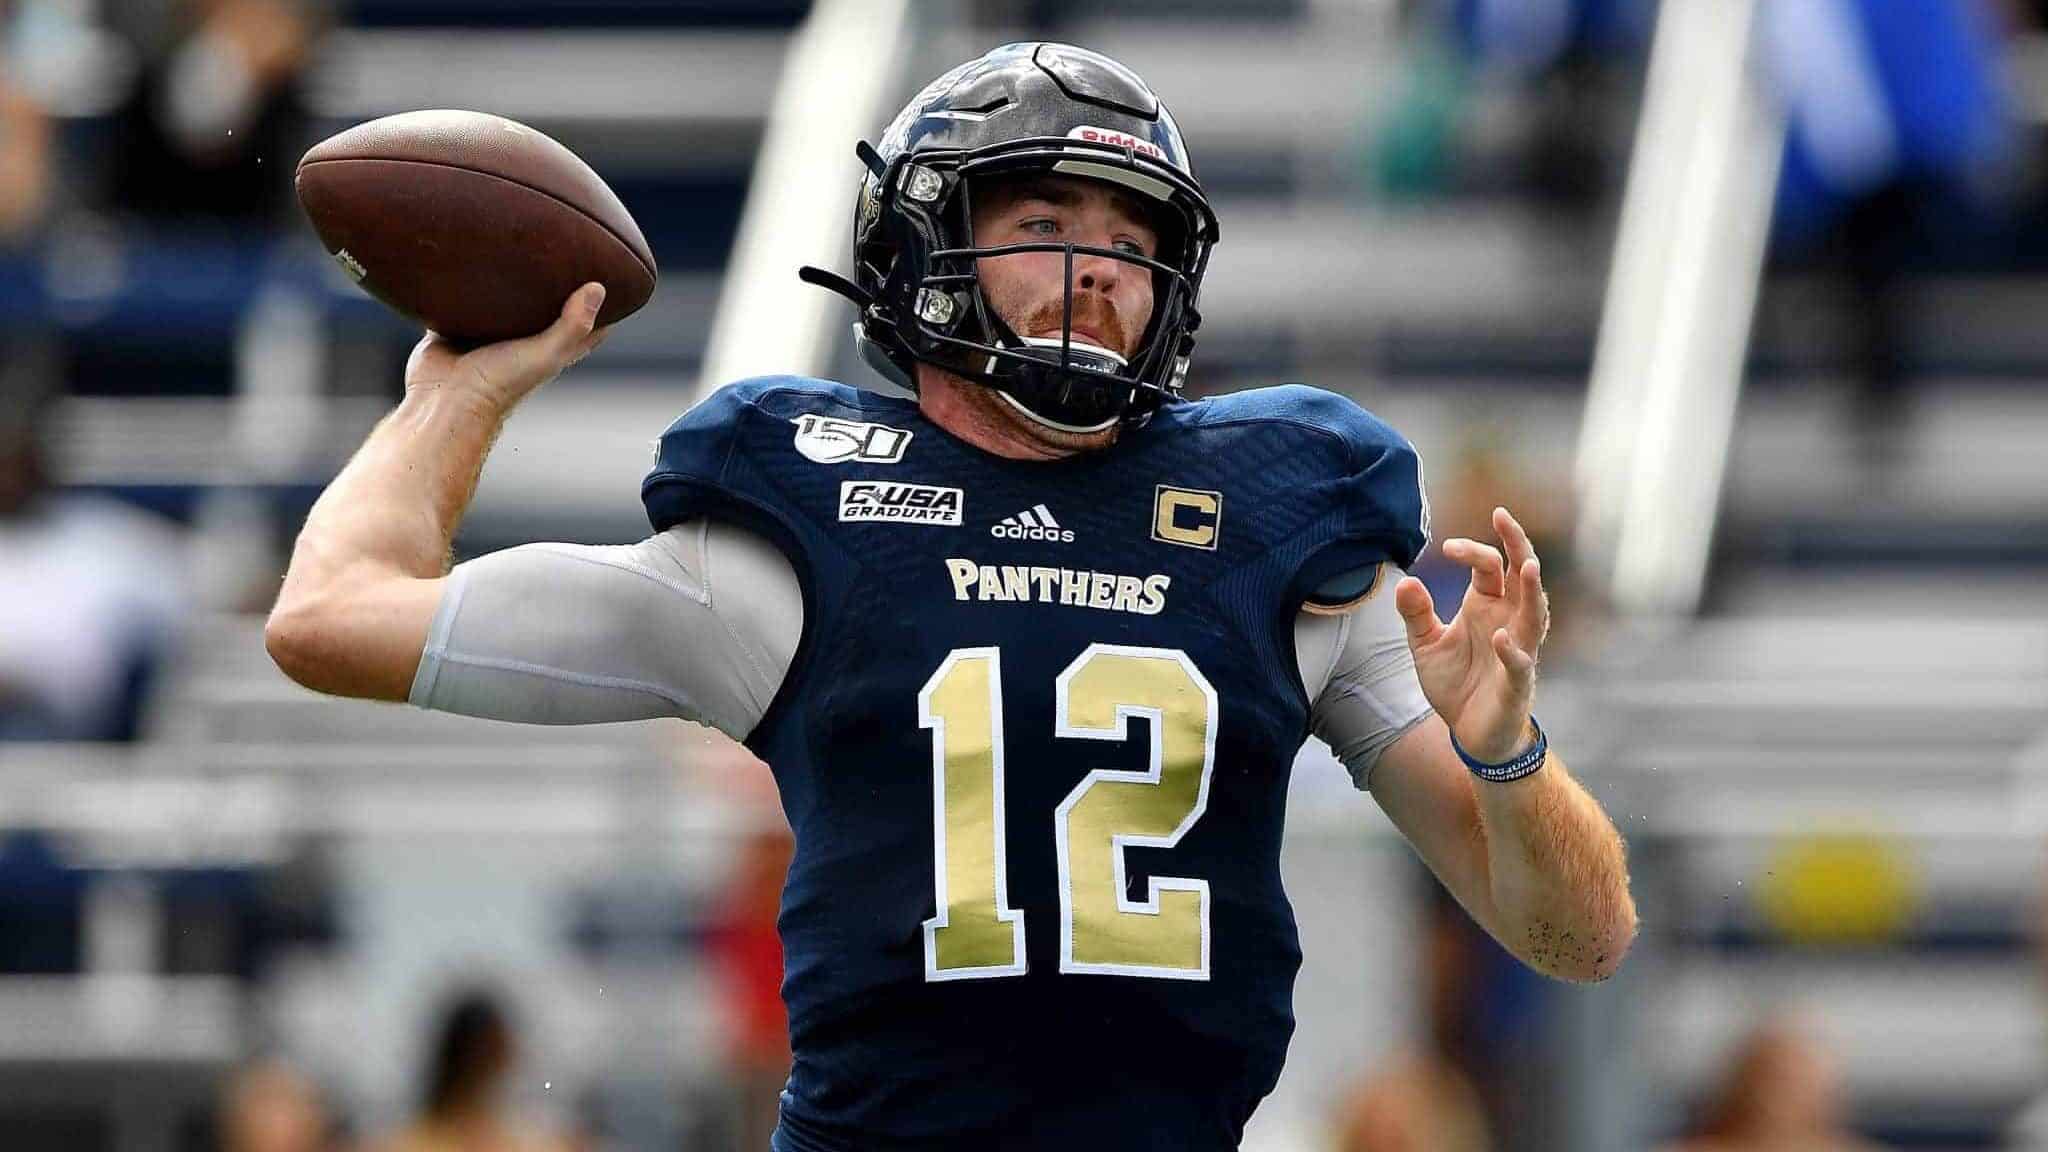 MIAMI, FLORIDA - NOVEMBER 02: James Morgan #12 of the FIU Golden Panthers looks to pass against the Old Dominion Monarchs in the first half at Ricardo Silva Stadium on November 02, 2019 in Miami, Florida. New York Jets